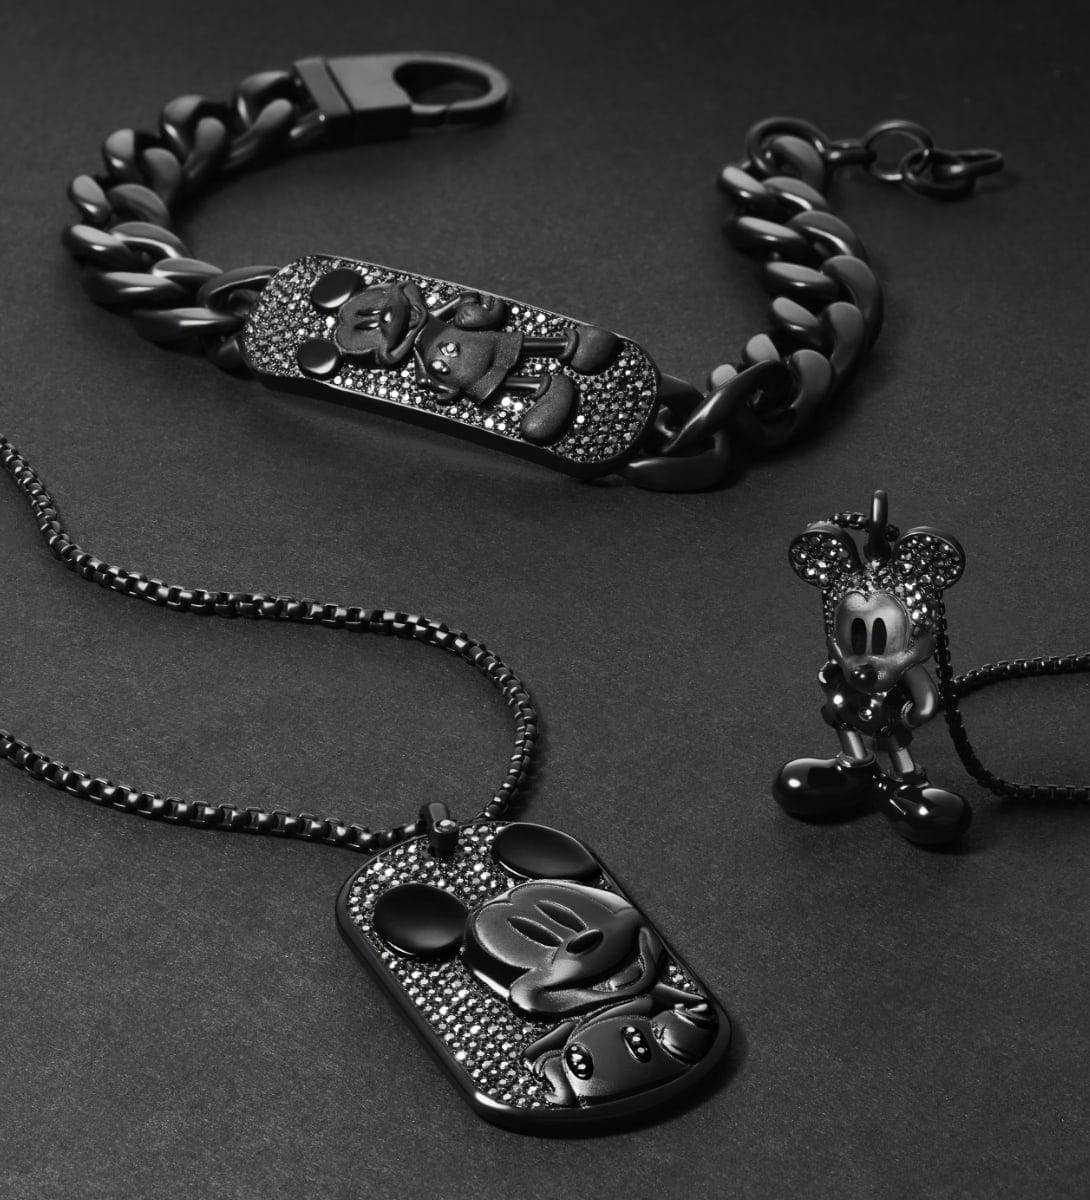 Three pieces of all-black Mickey Mouse jewelry, each studded with hematite crystals. A chain identification bracelet, dog tag-style necklace and figurine pendant necklace are artfully arranged on a black background.